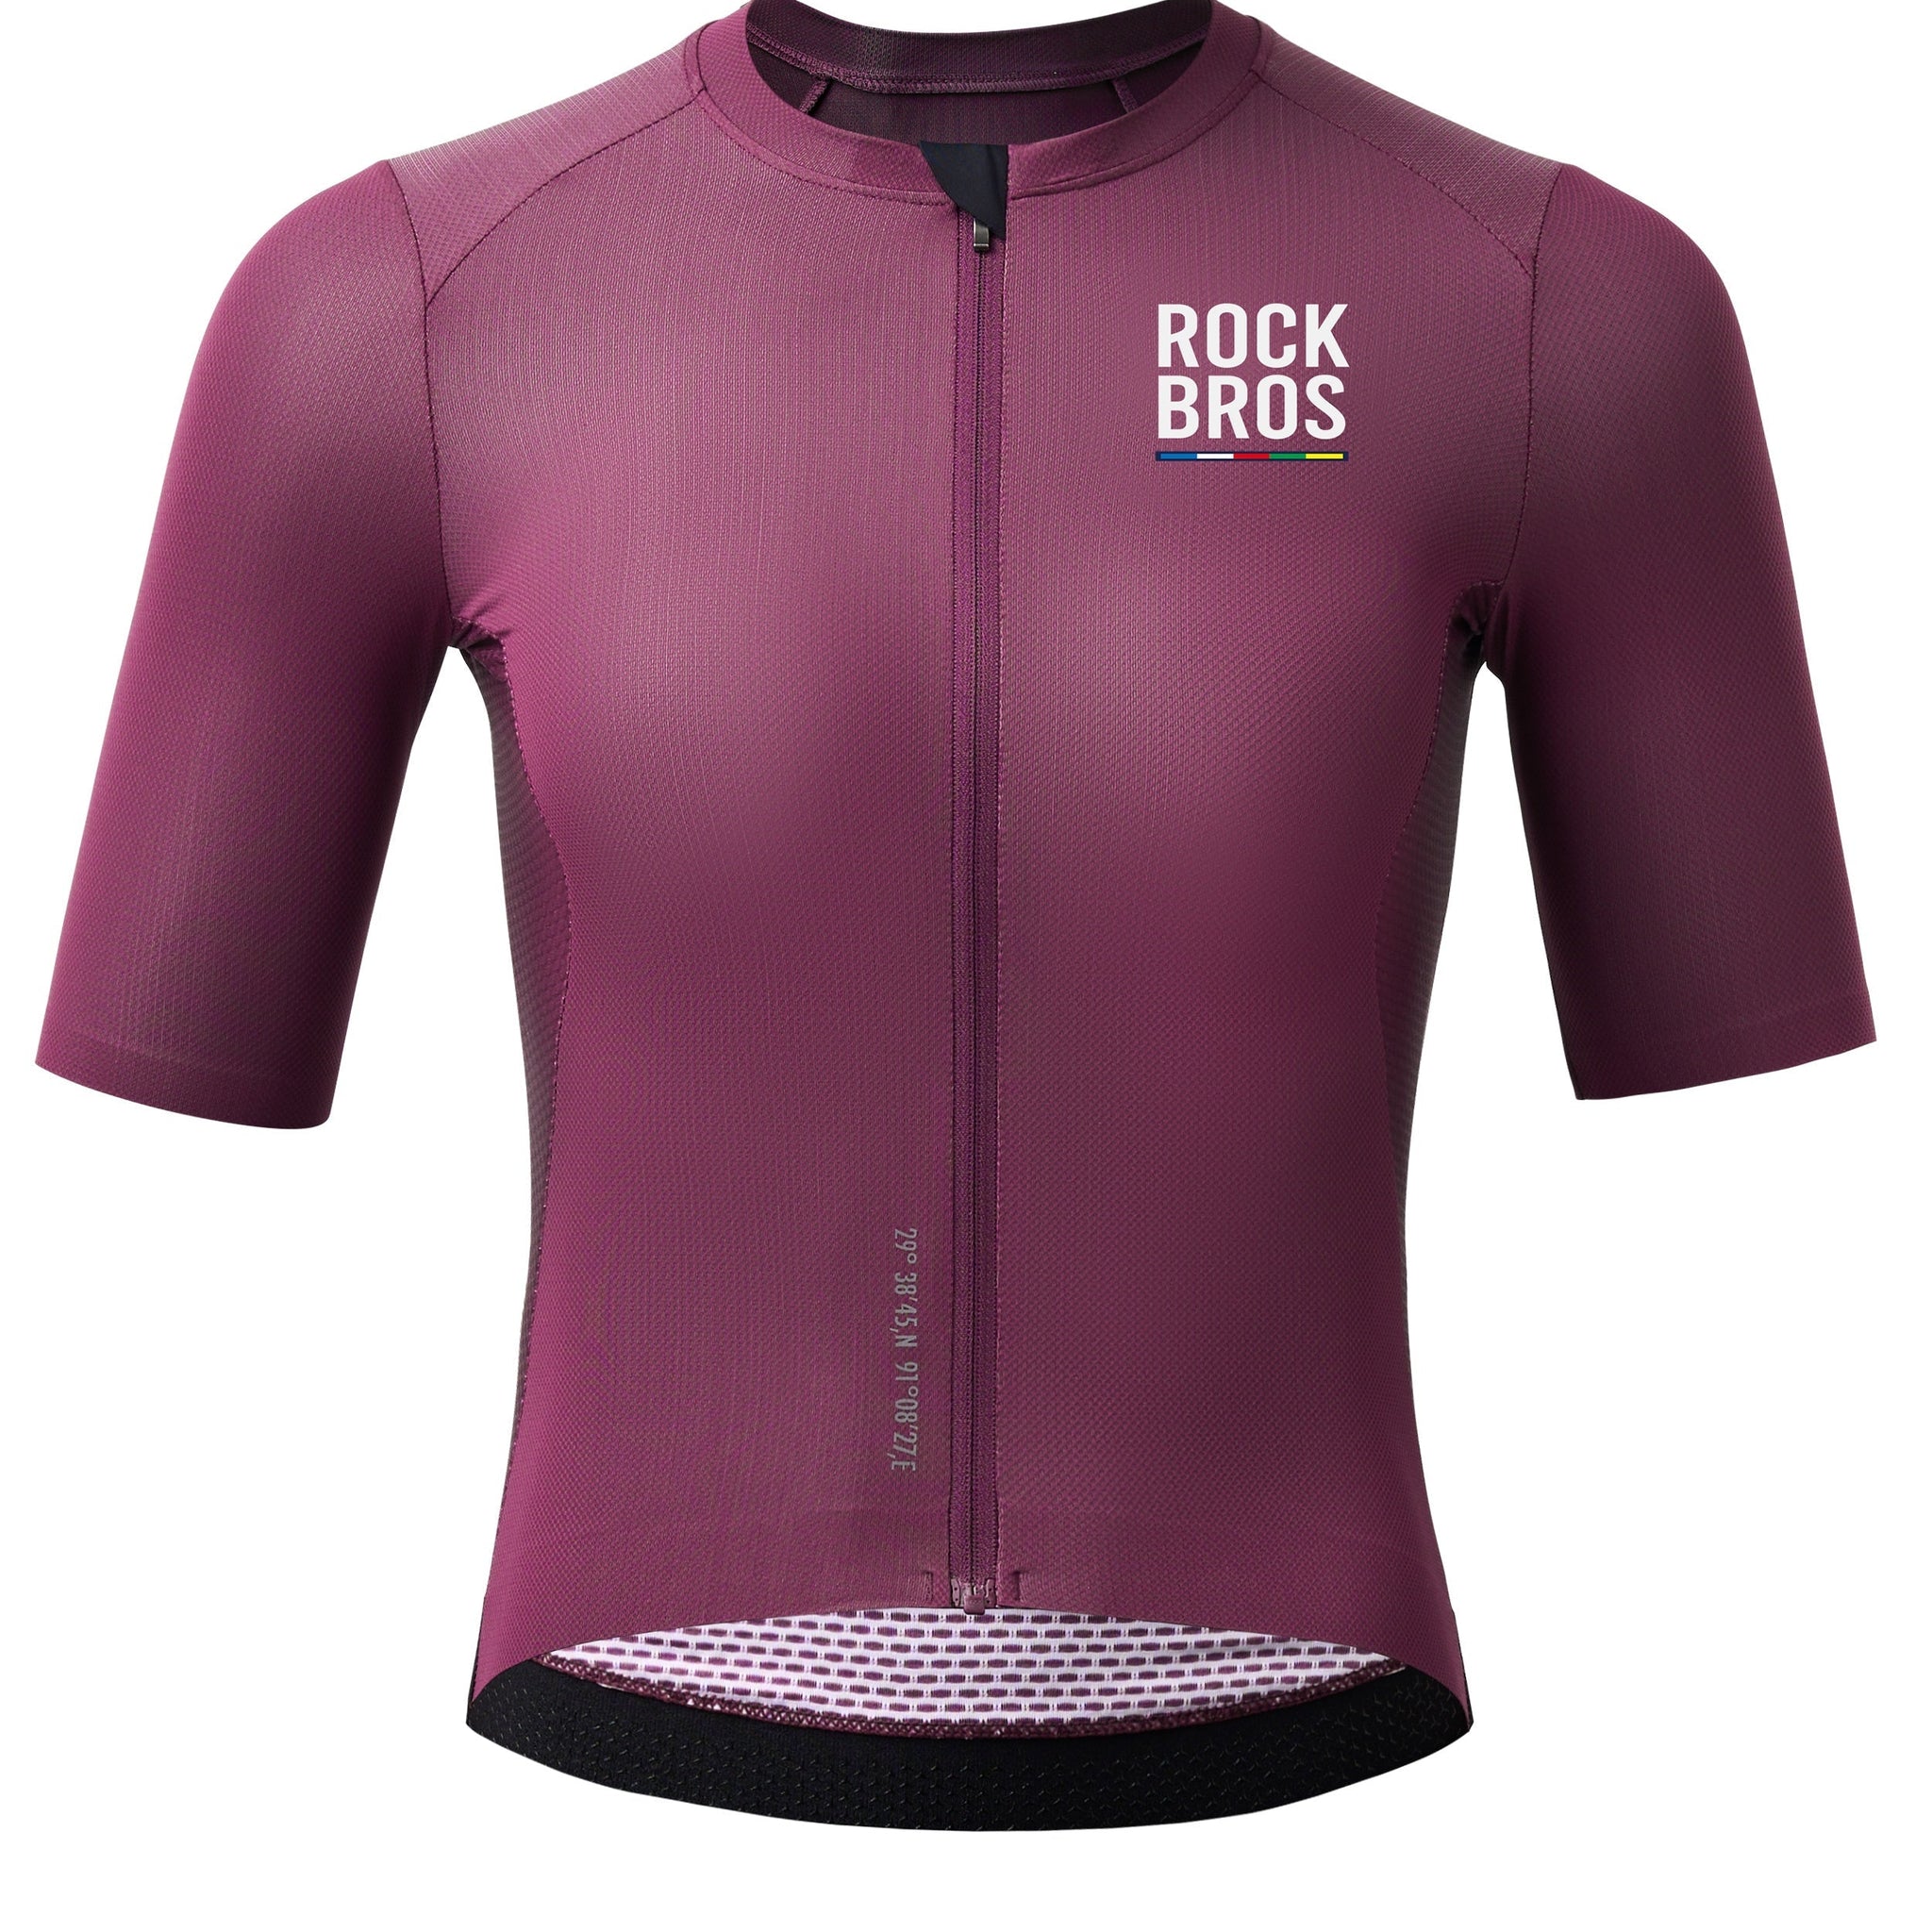 ROCKBROS Women's Cycling Short-Sleeved Jersey-road to sky